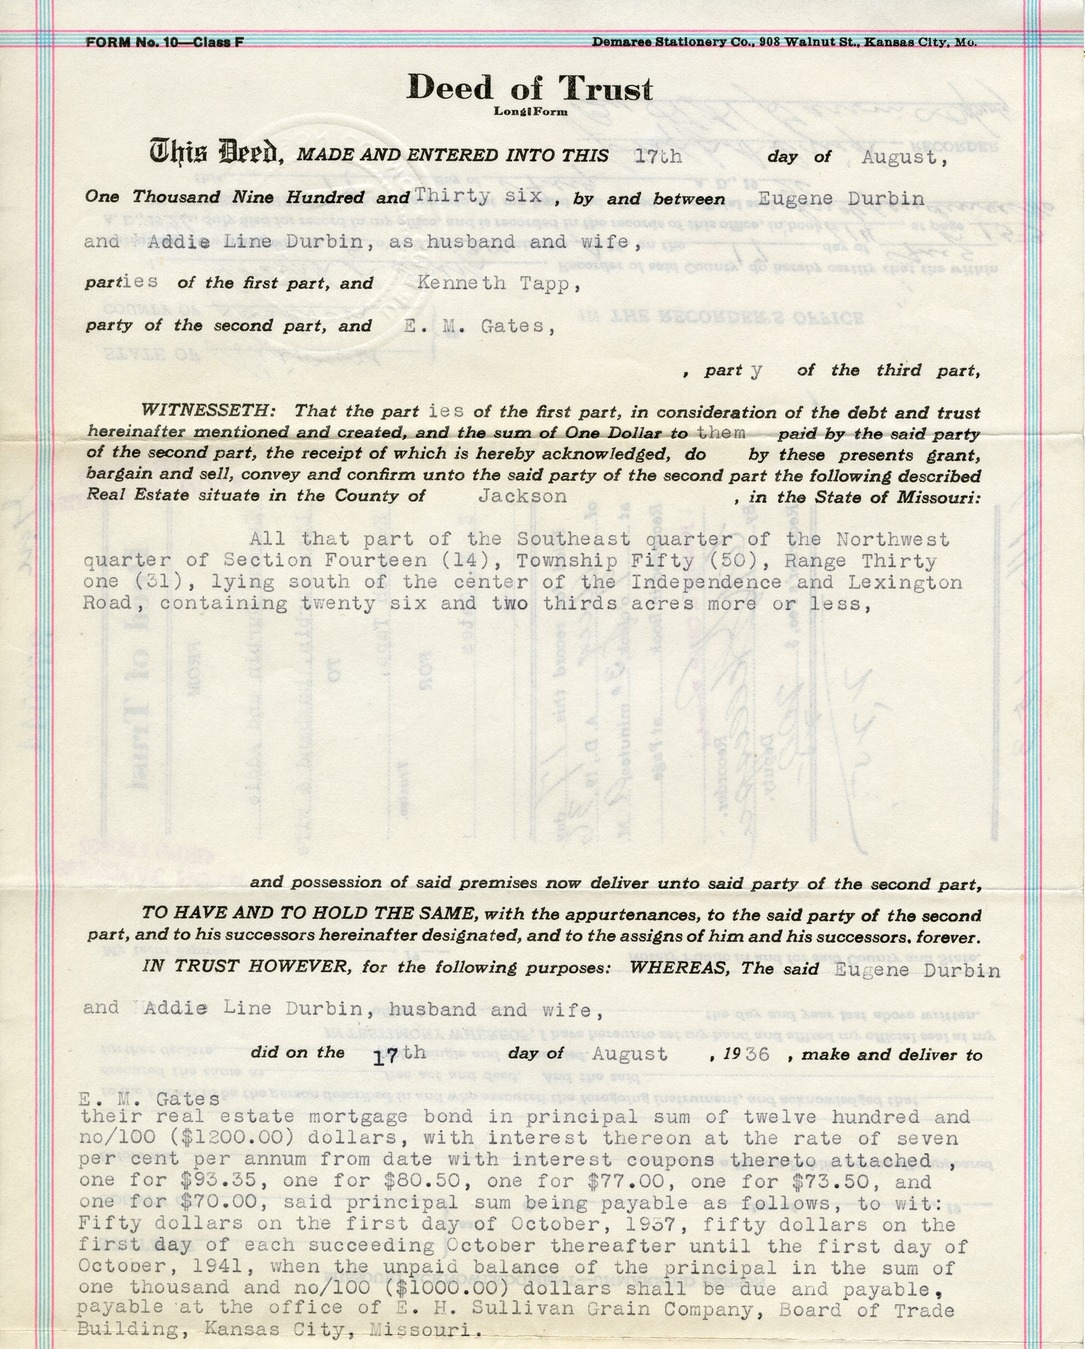 Deed of Trust from Eugene Durbin and Addie Line Durbin to Kenneth Tapp